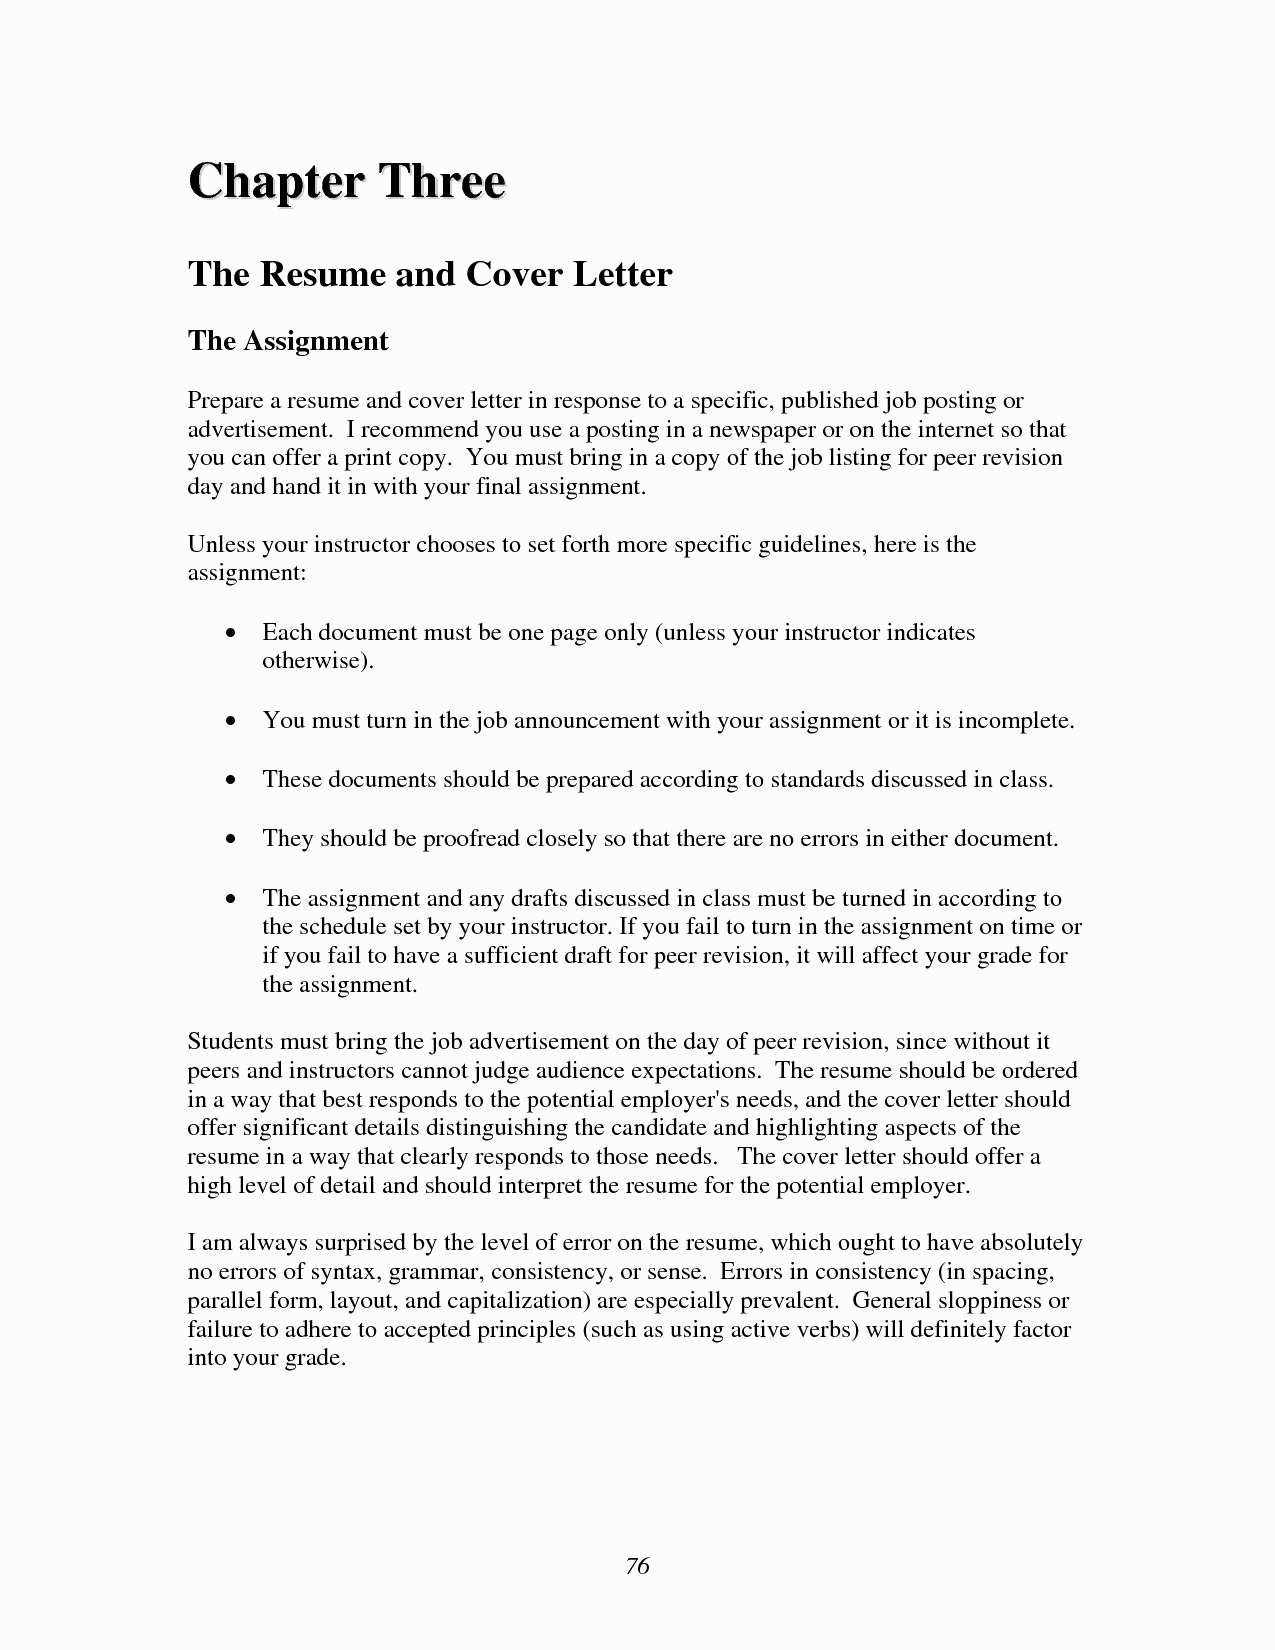 Cover Letter for Essay Template - Resume and Cover Letter Template Beautiful Fresh Job Fer Letter